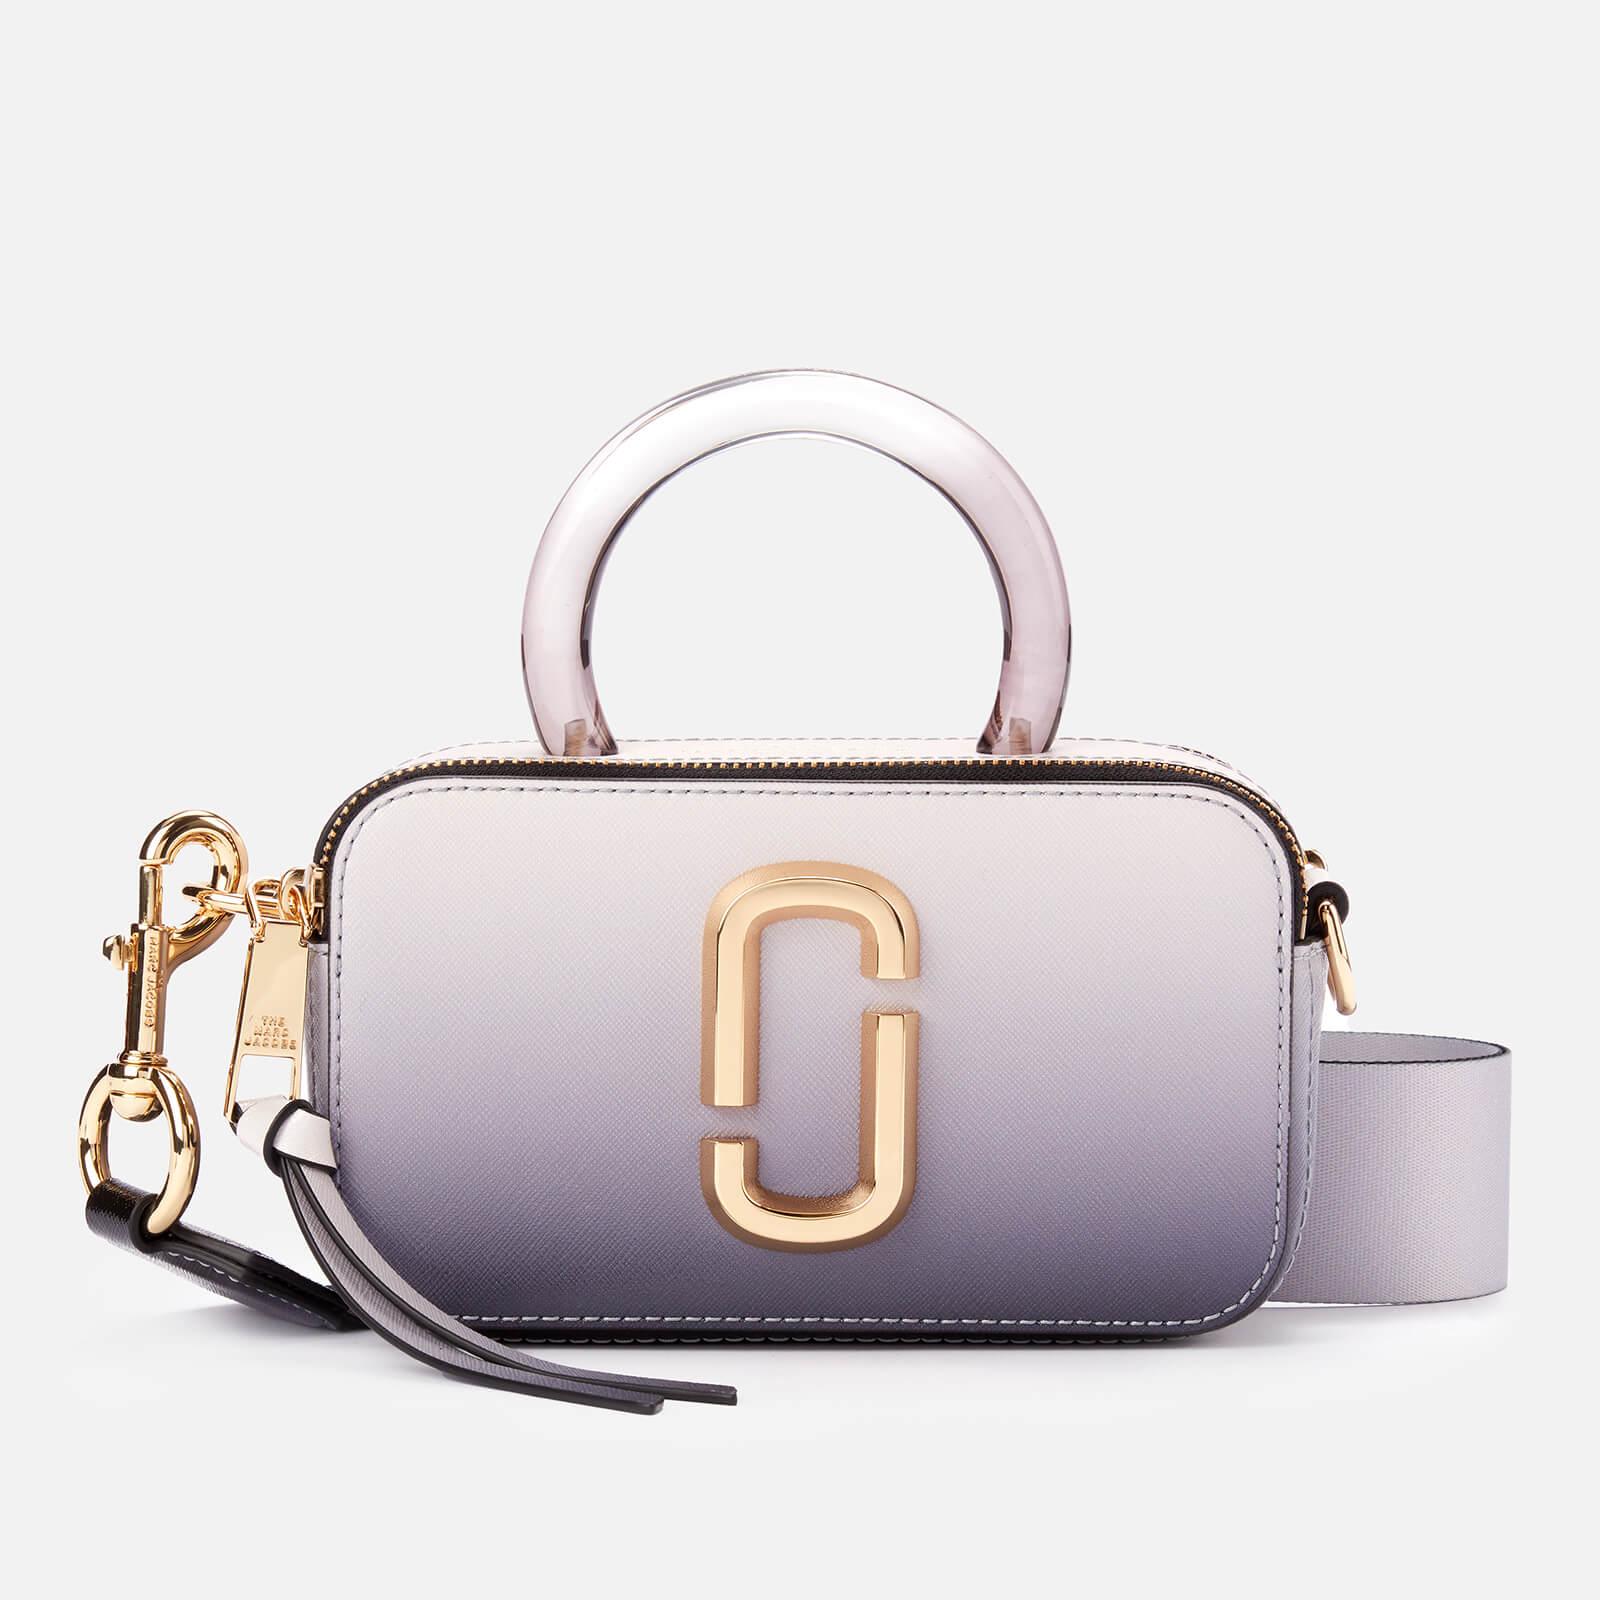 Marc Jacobs The Snapshot Resin Handle Bag in Gray